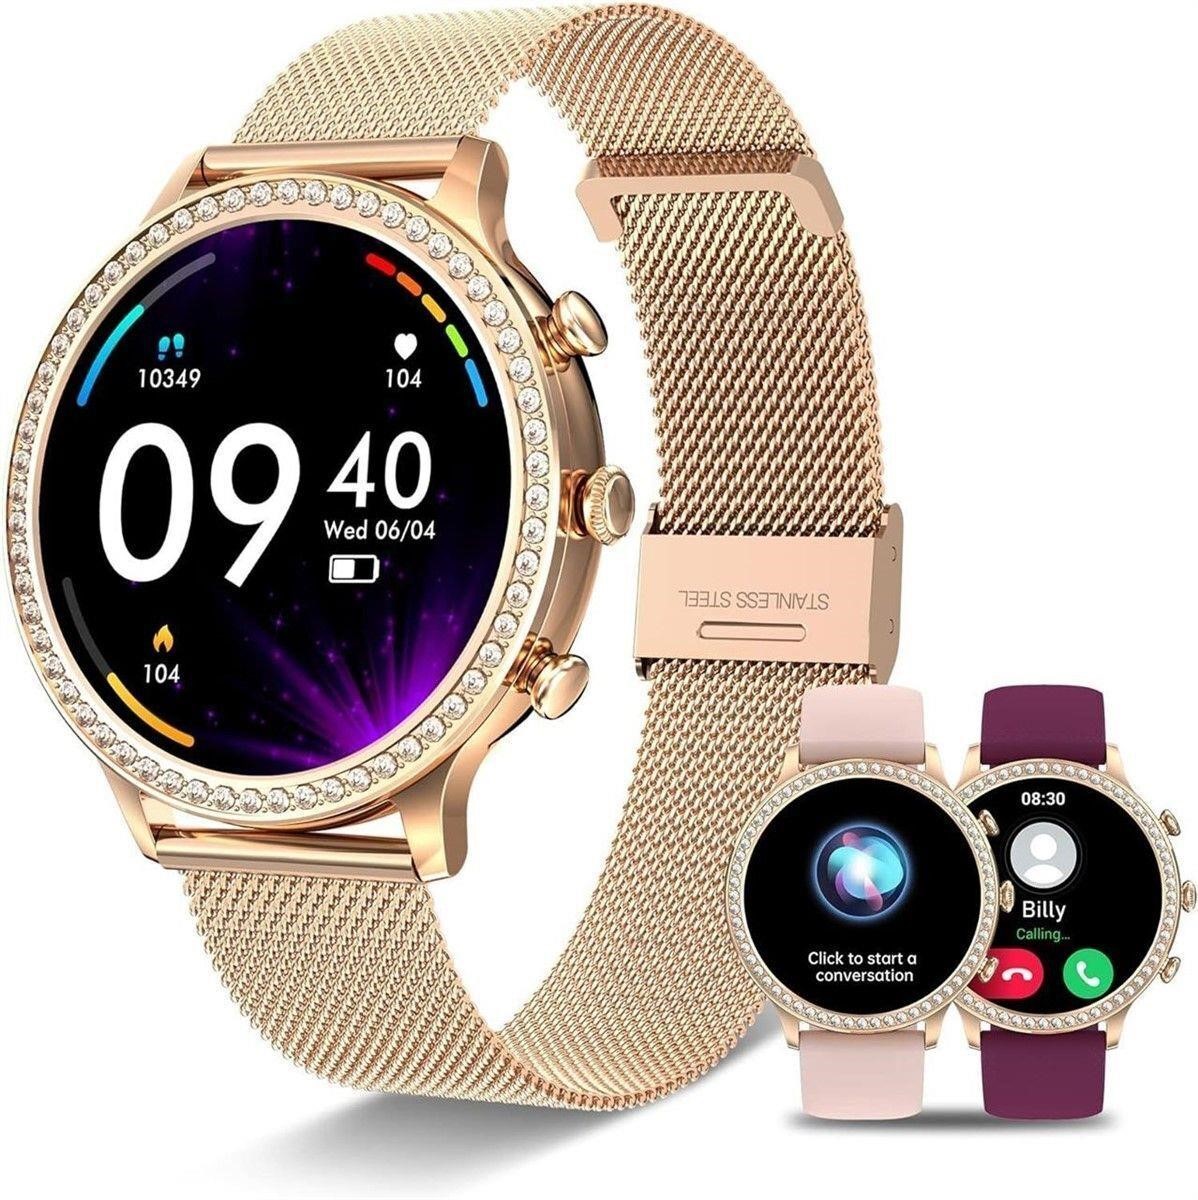 NEW, Smart Watch/ call, receive. Android iOS